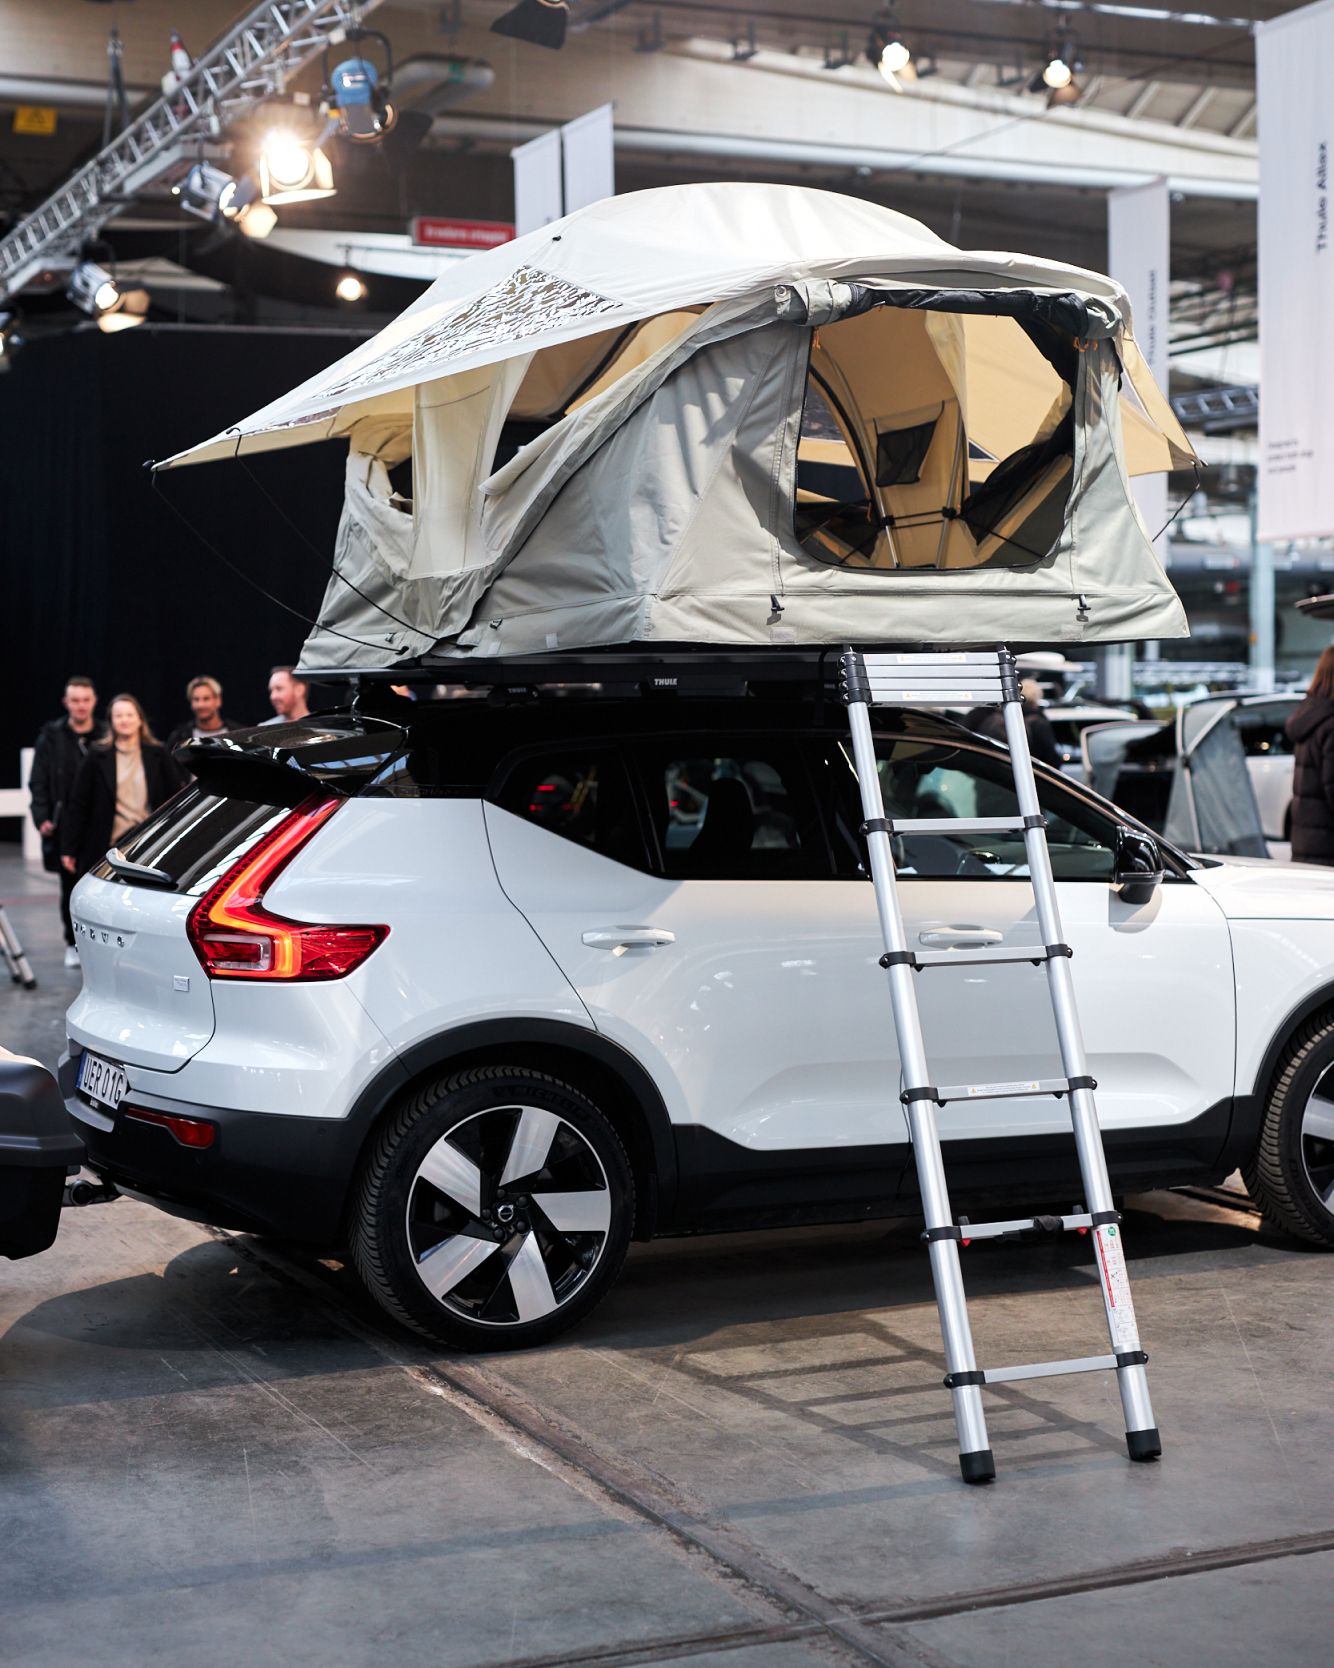 A white Volvo XC40 with an unfolded Thule Approach rooftop tent parked in a large exhibition hall. There are metal stairs leading to the open rooftop tent and people standing behind the car.